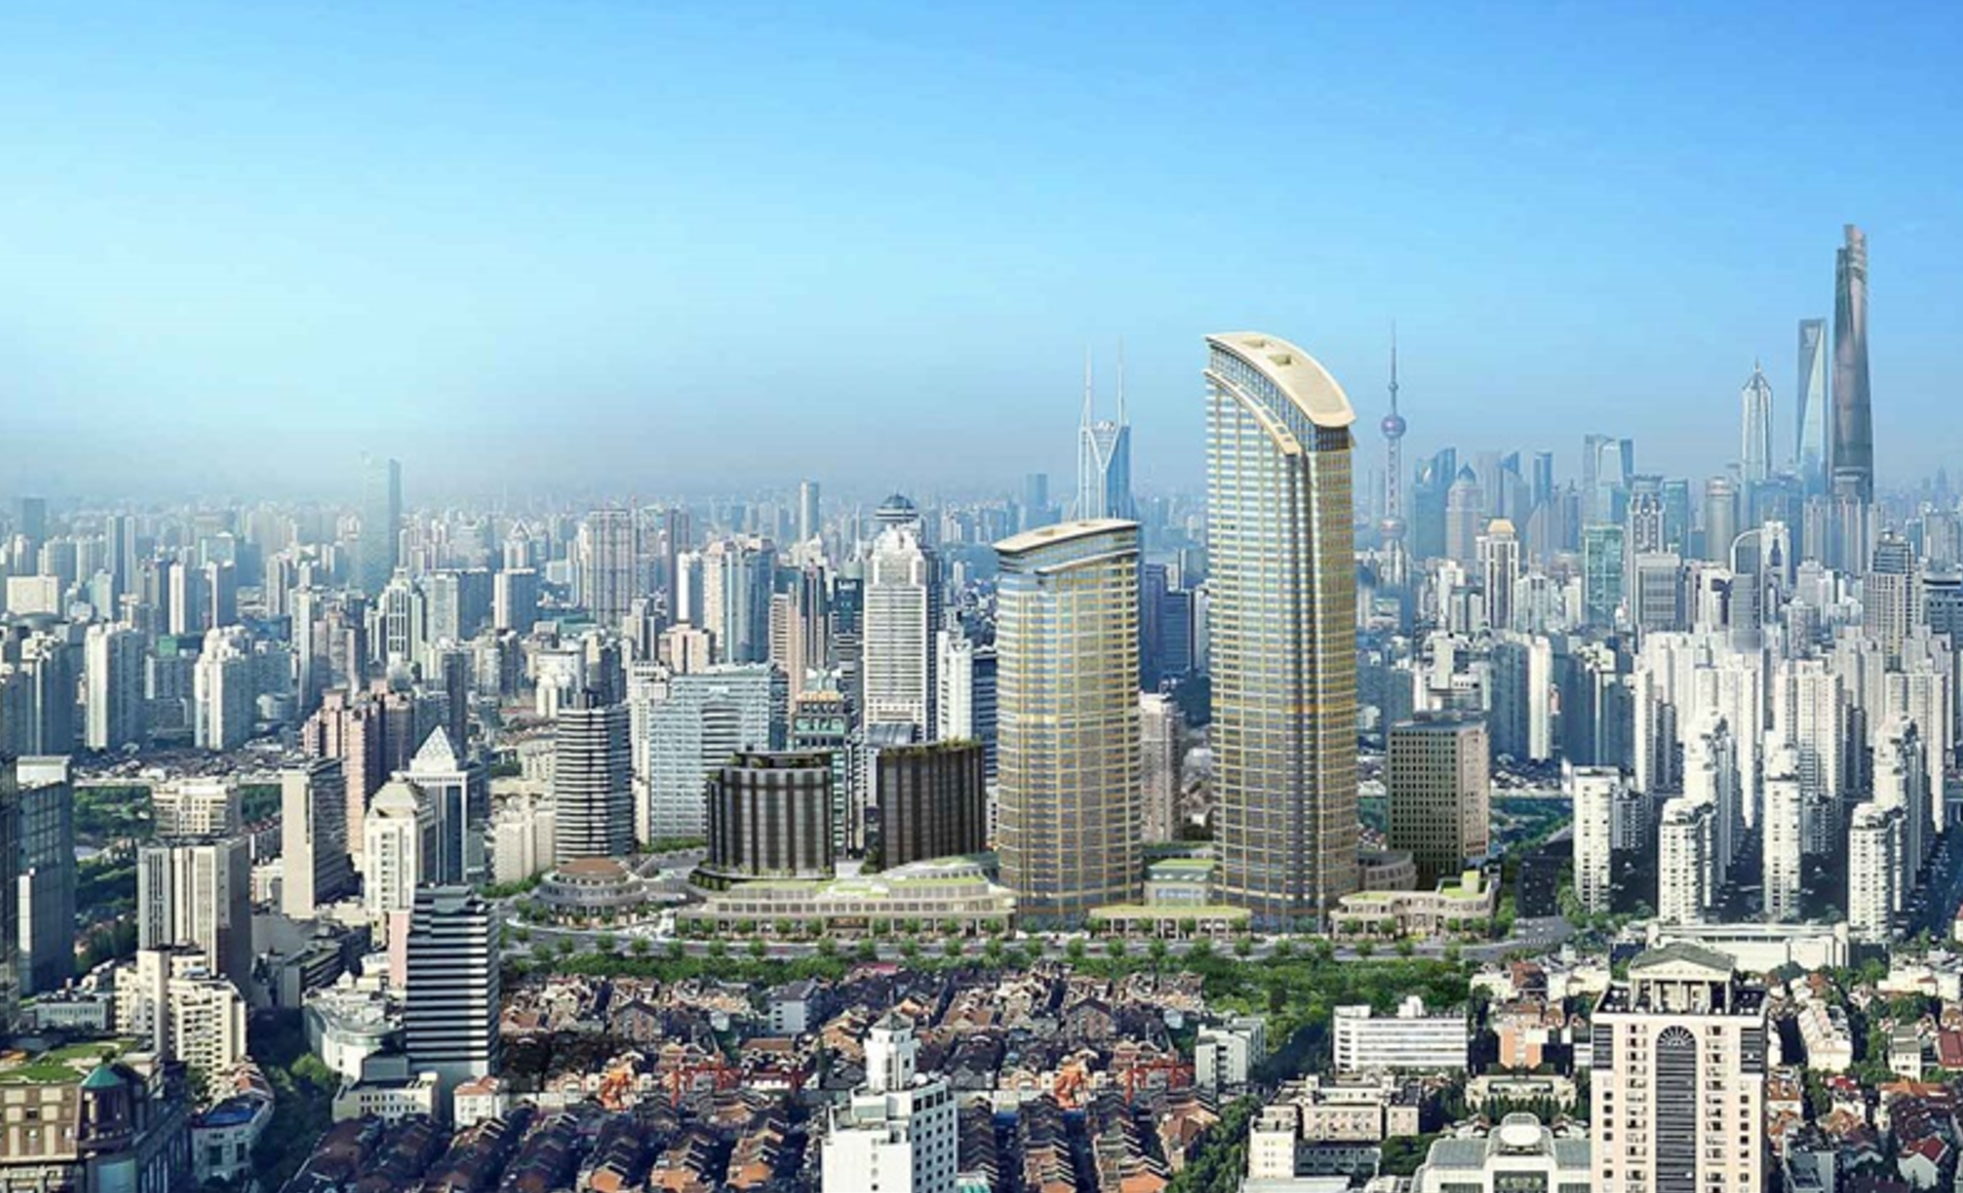 Swire's newest hotel, residences, and office development in Shanghai. (Courtesy Photo)